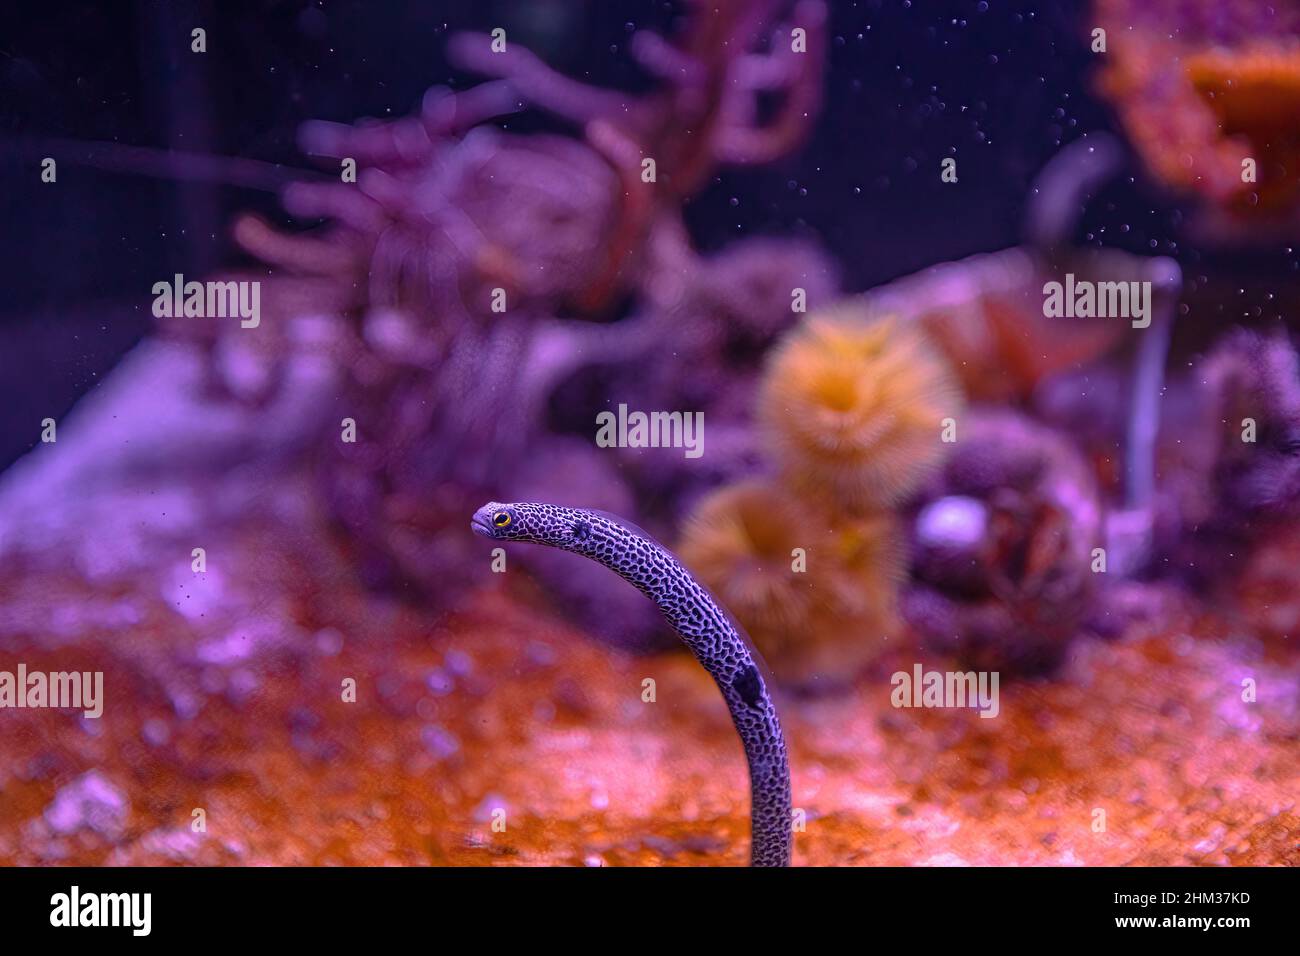 Spotted garden eel of aquarium with anemone in coral reef. Heteroconger hassi species living in Indo-Pacific seas, from Red Sea to Polynesia and Stock Photo